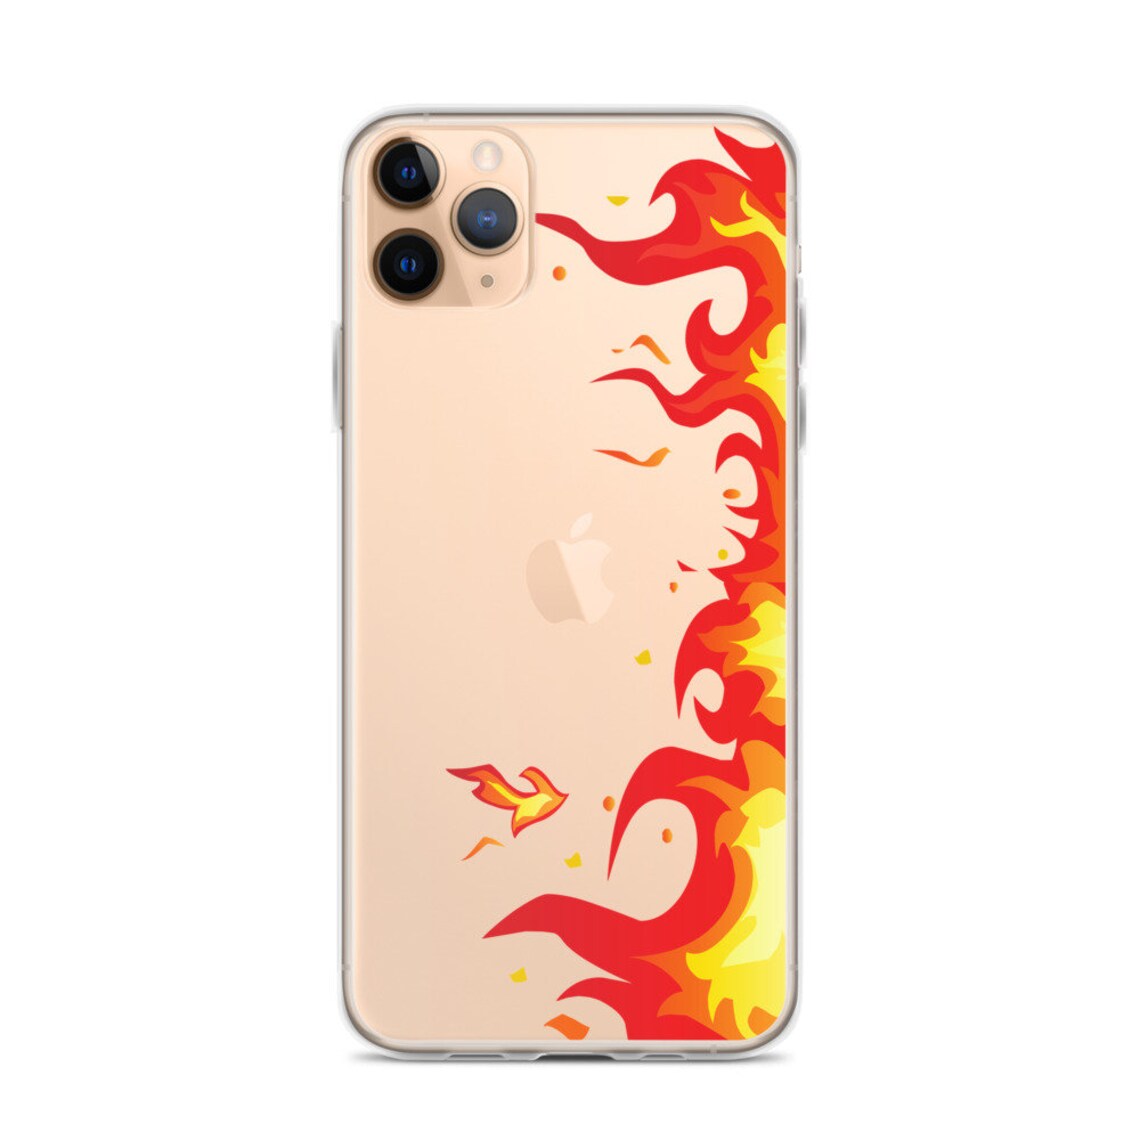 Flames iPhone Case Abstract phone case iPhone 12 Pro case | Etsy